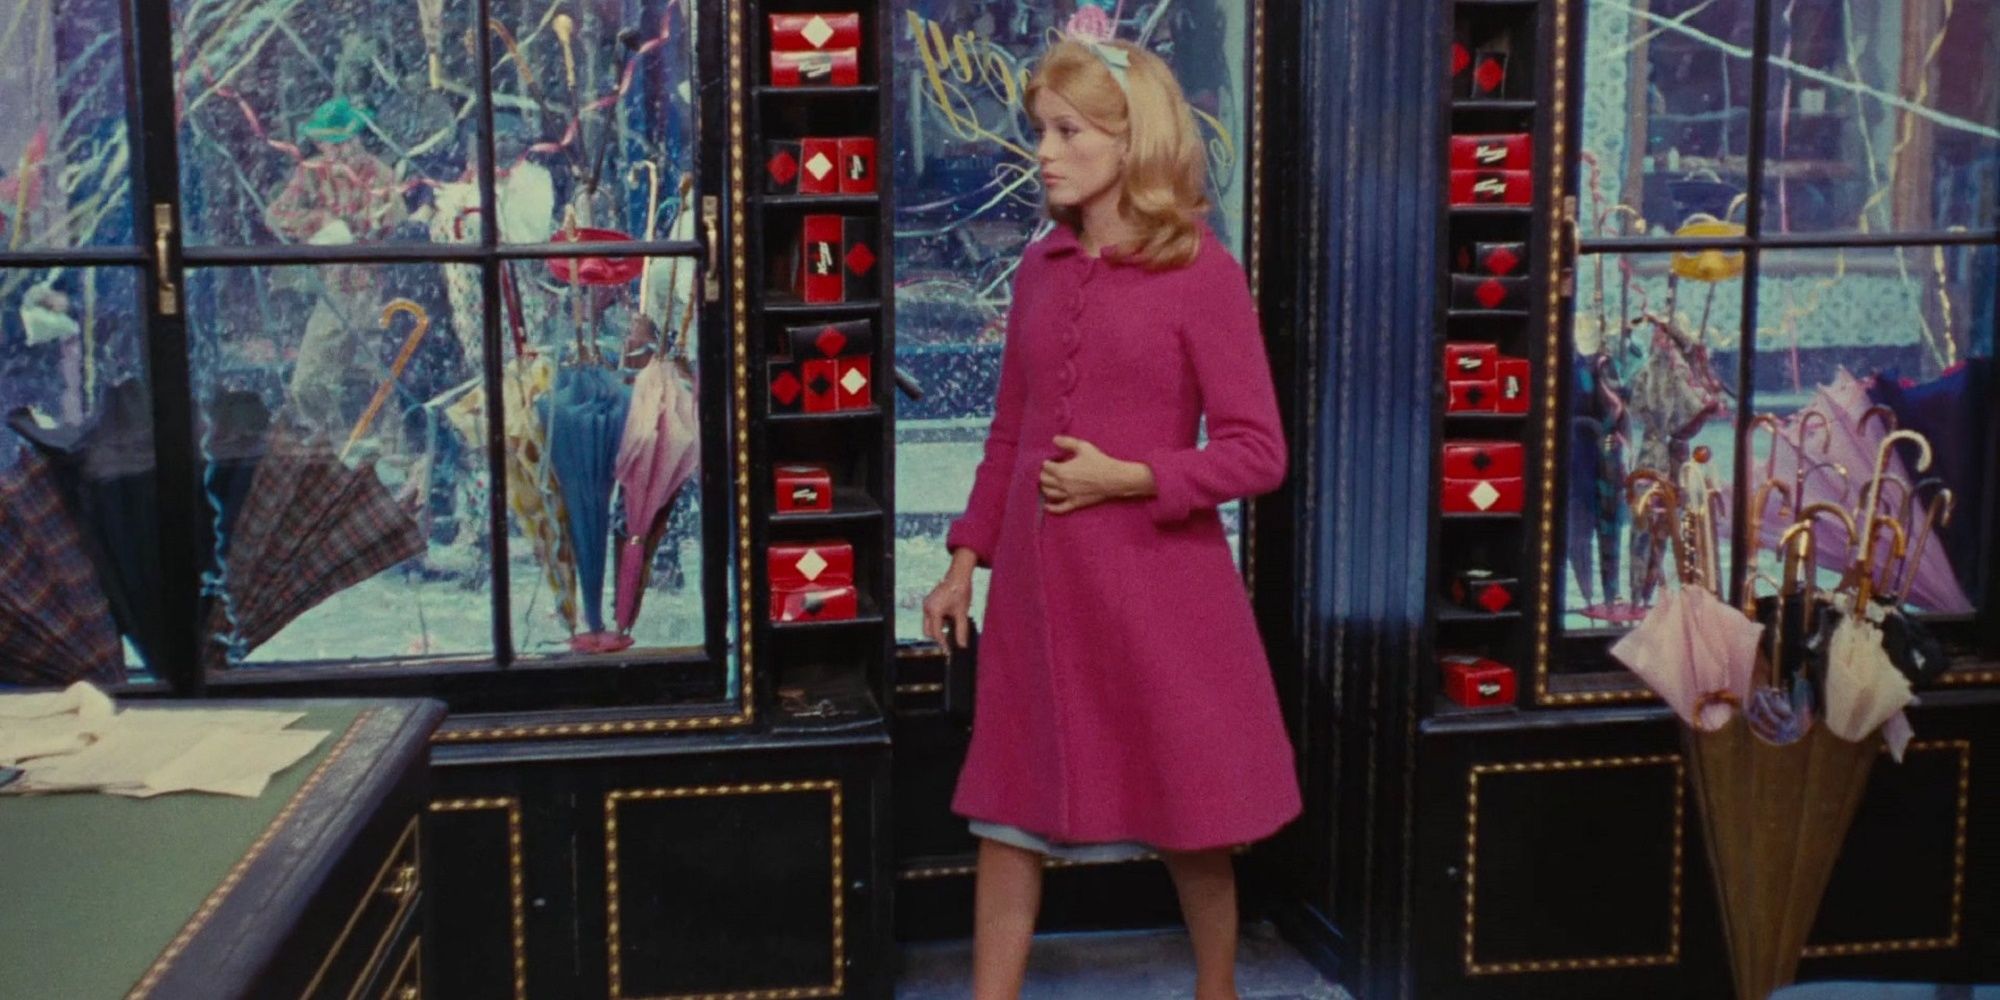 Geneviève in front of her umbrella boutique in The Umbrellas of Cherbourg.